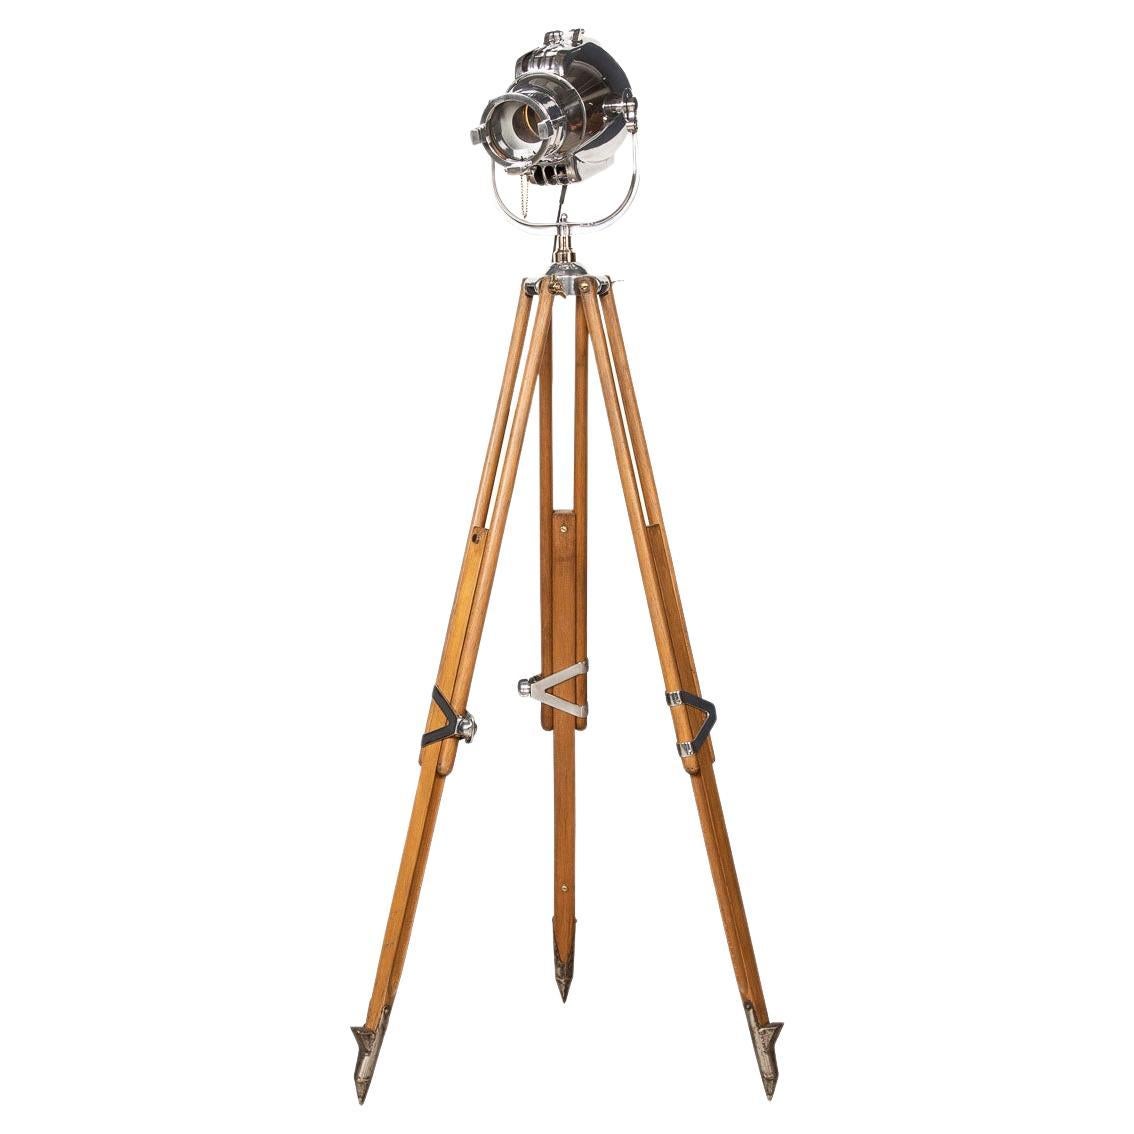 20th Century English "Strand Electric" Theatre Lamp On A Tripod Stand